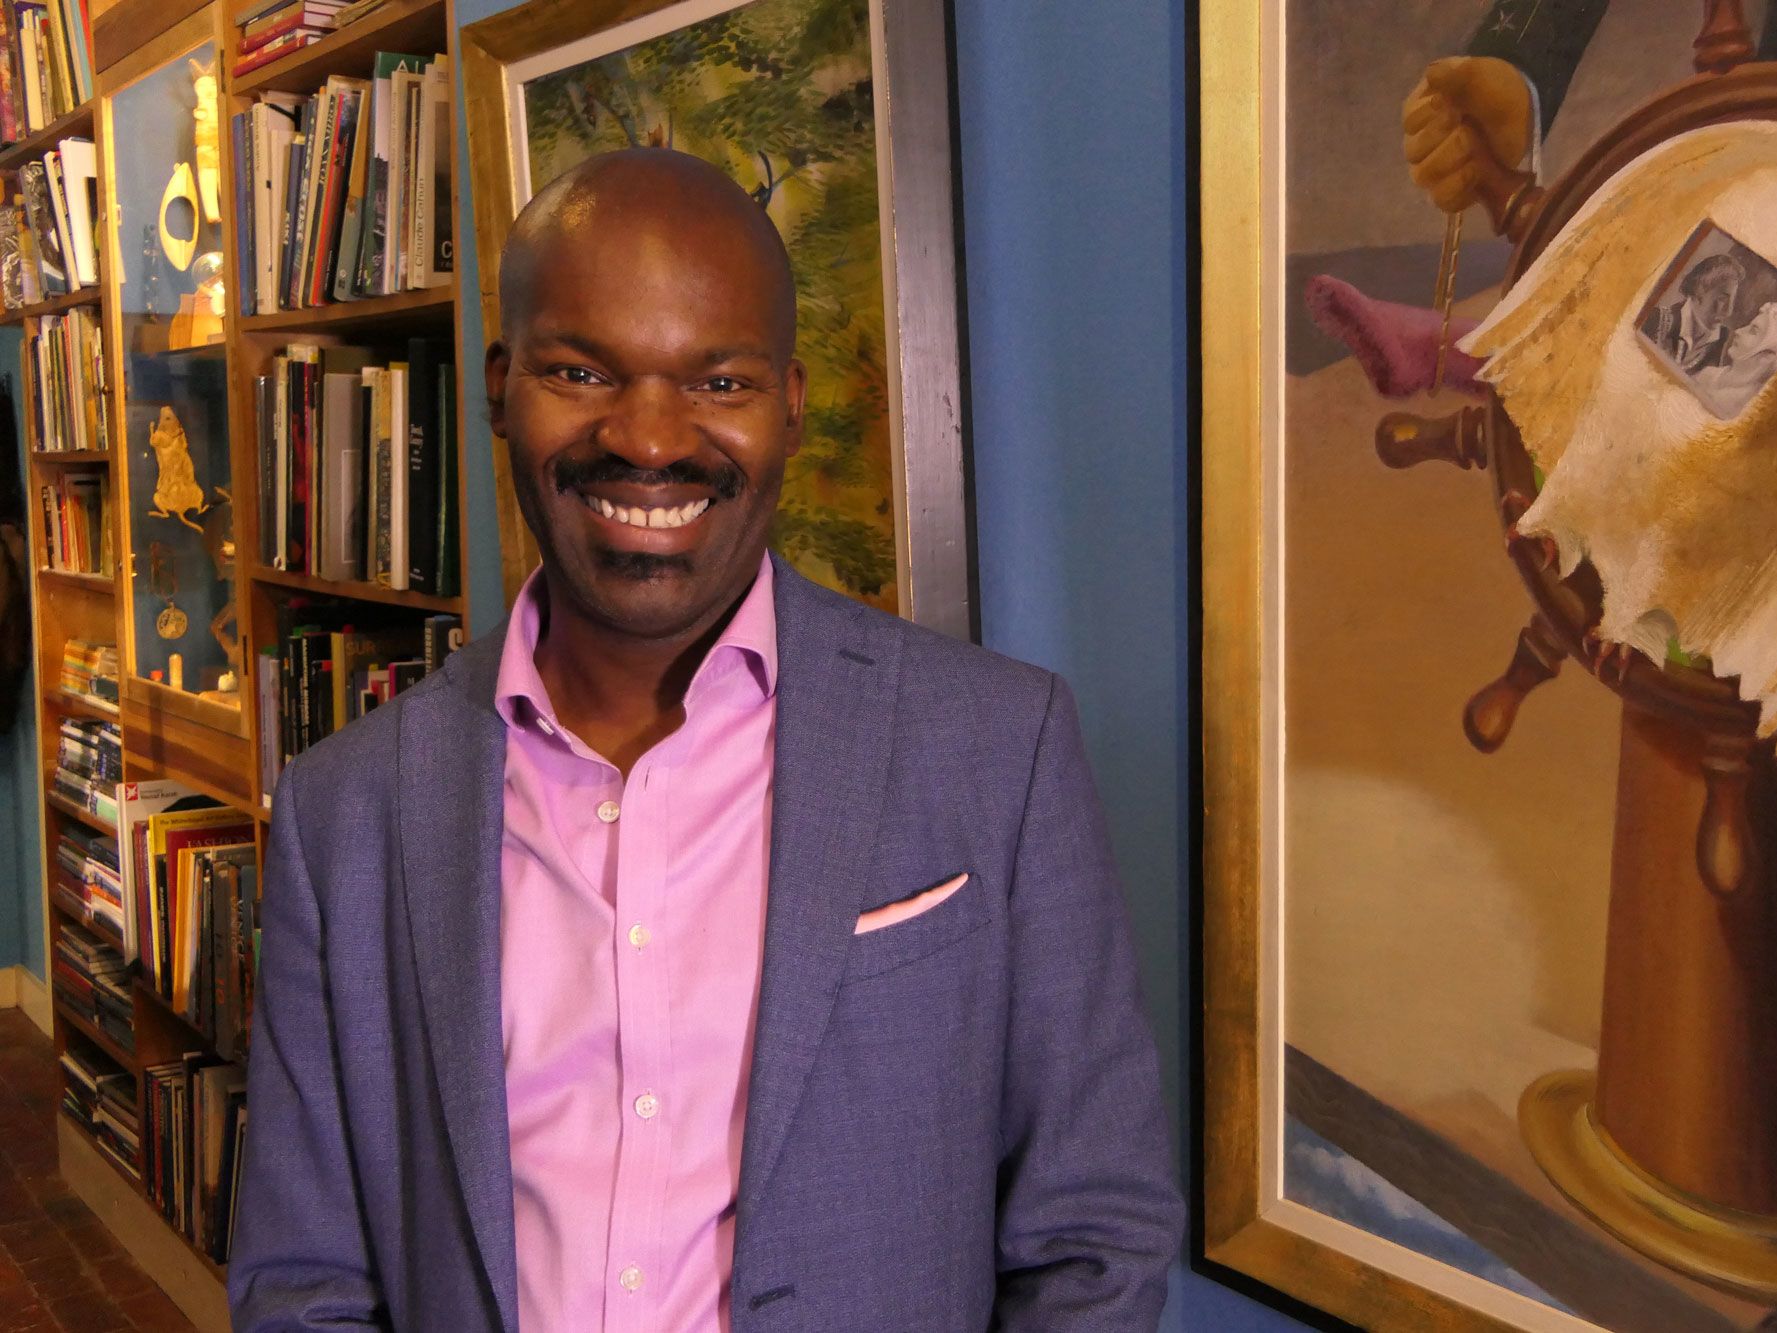 Portrait of David smiling, standing next to a colourful artwork